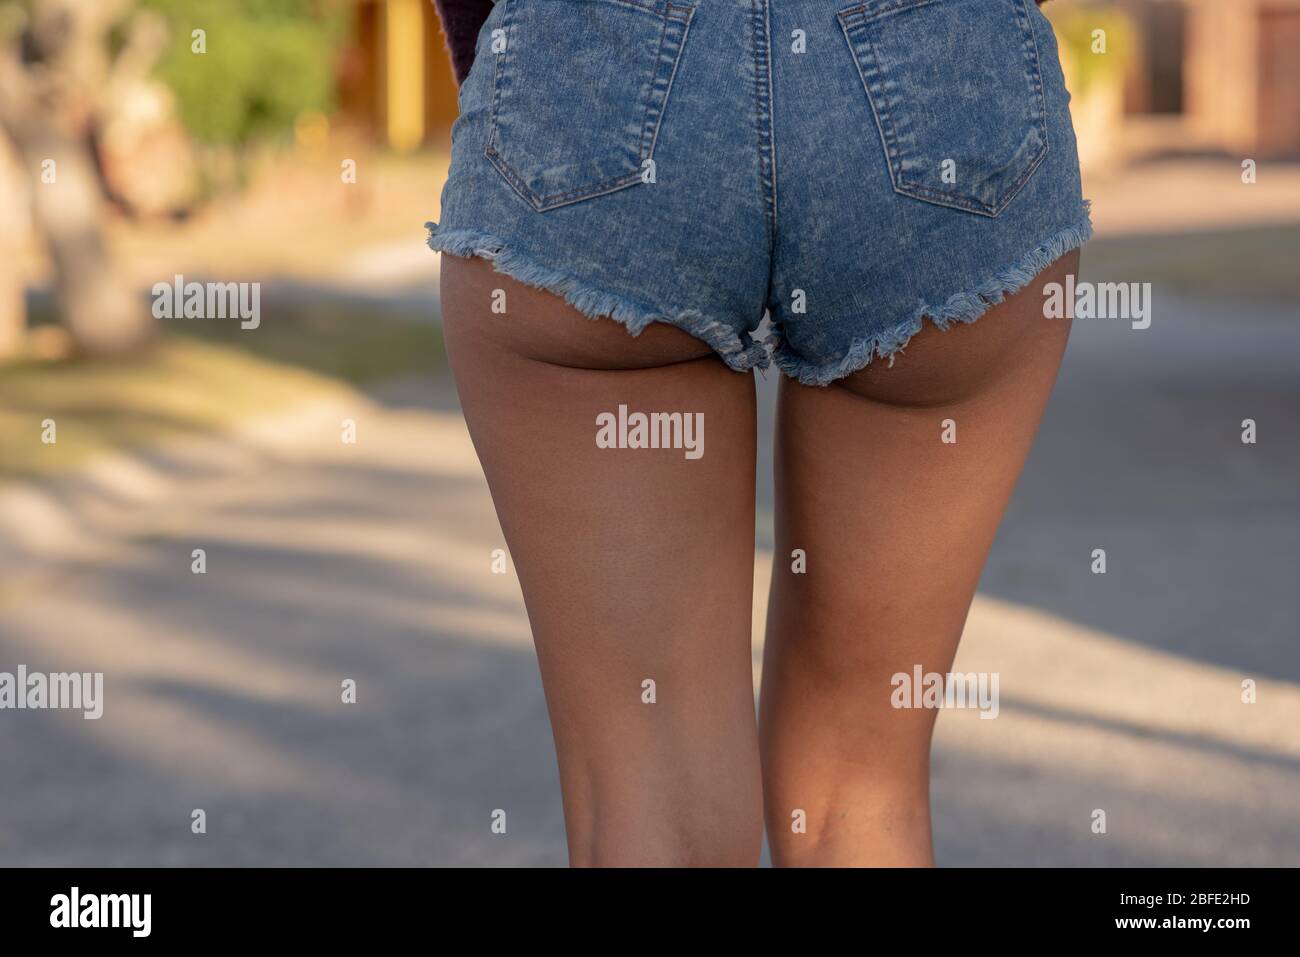 Rear view of young woman with tight jeans on Stock Photo